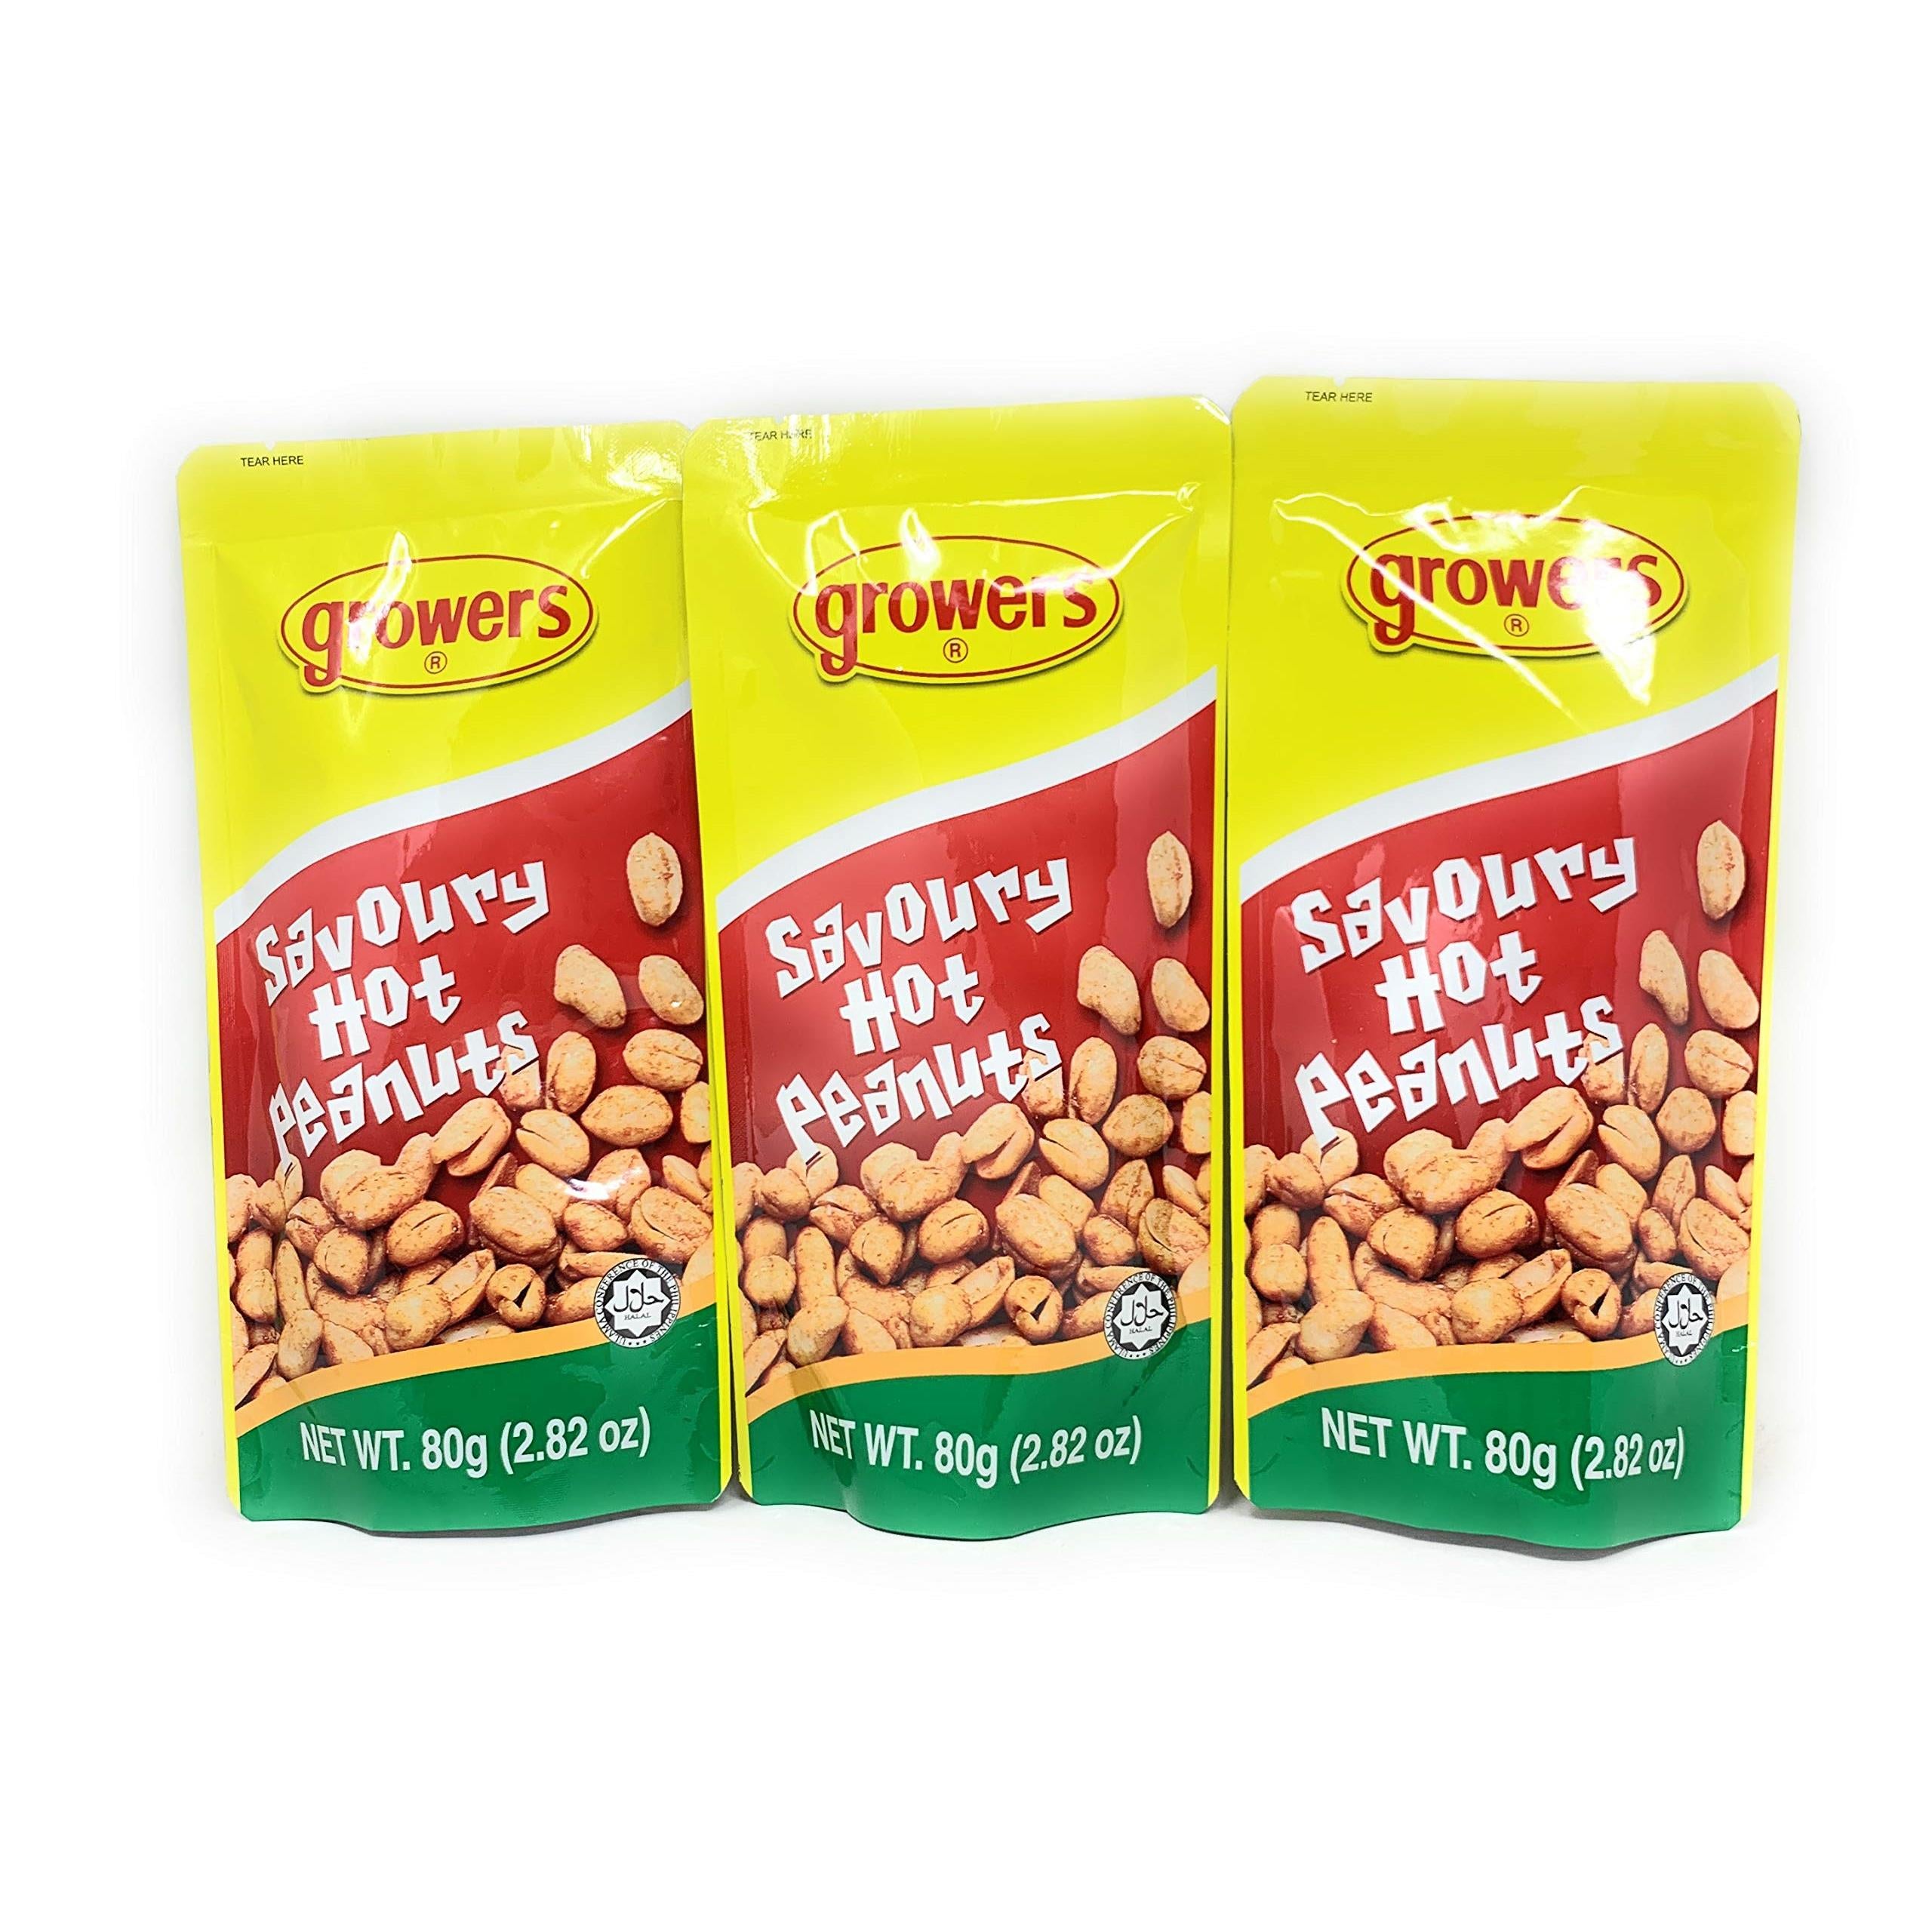 Growers Savory Hot Peanuts 80g (2.82oz) 3 Pack